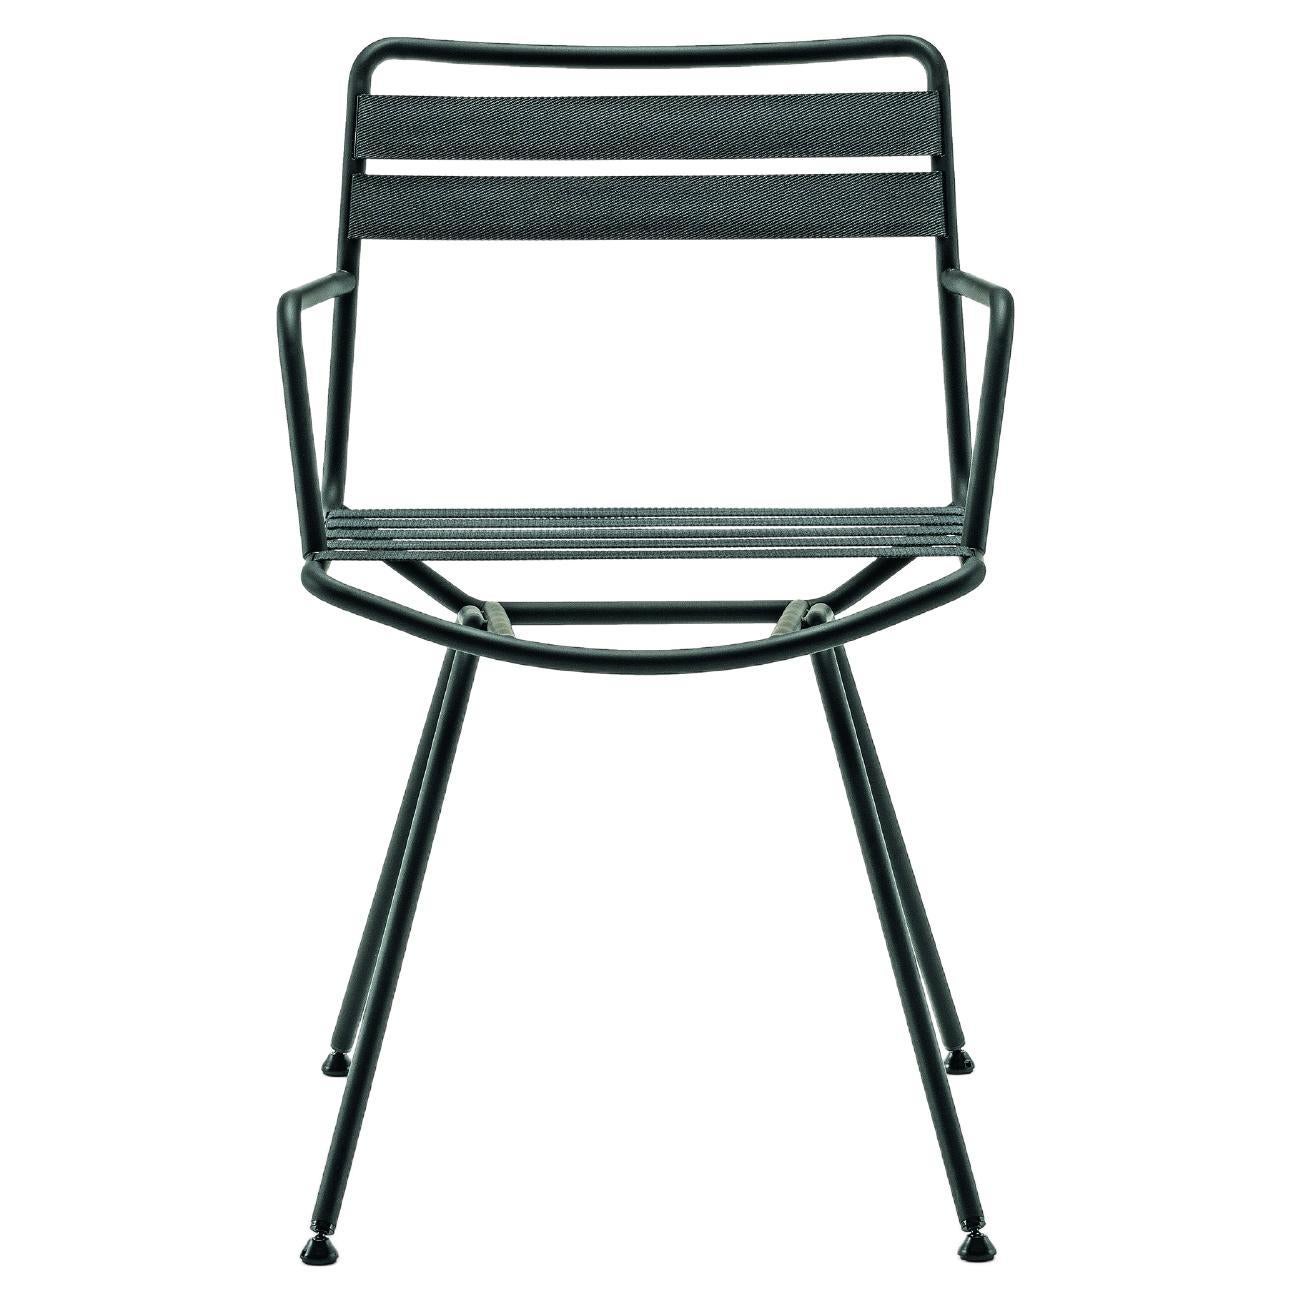 Zanotta Dan Armchair in Anthracite Elastic with Black Stainless Steel Frame